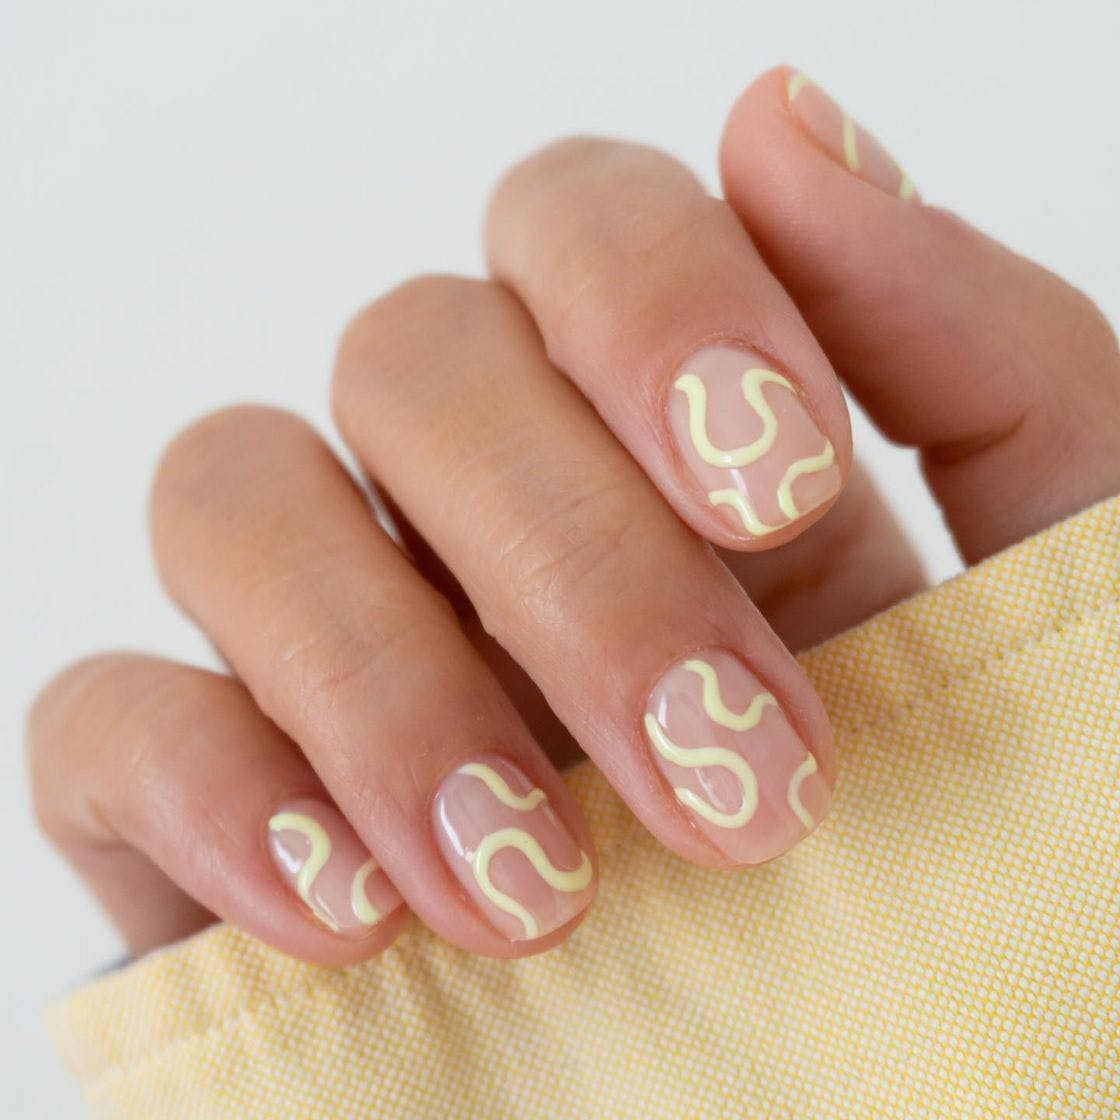 Chic Nail Art Ideas For The Ultimate Mani Inspo 20